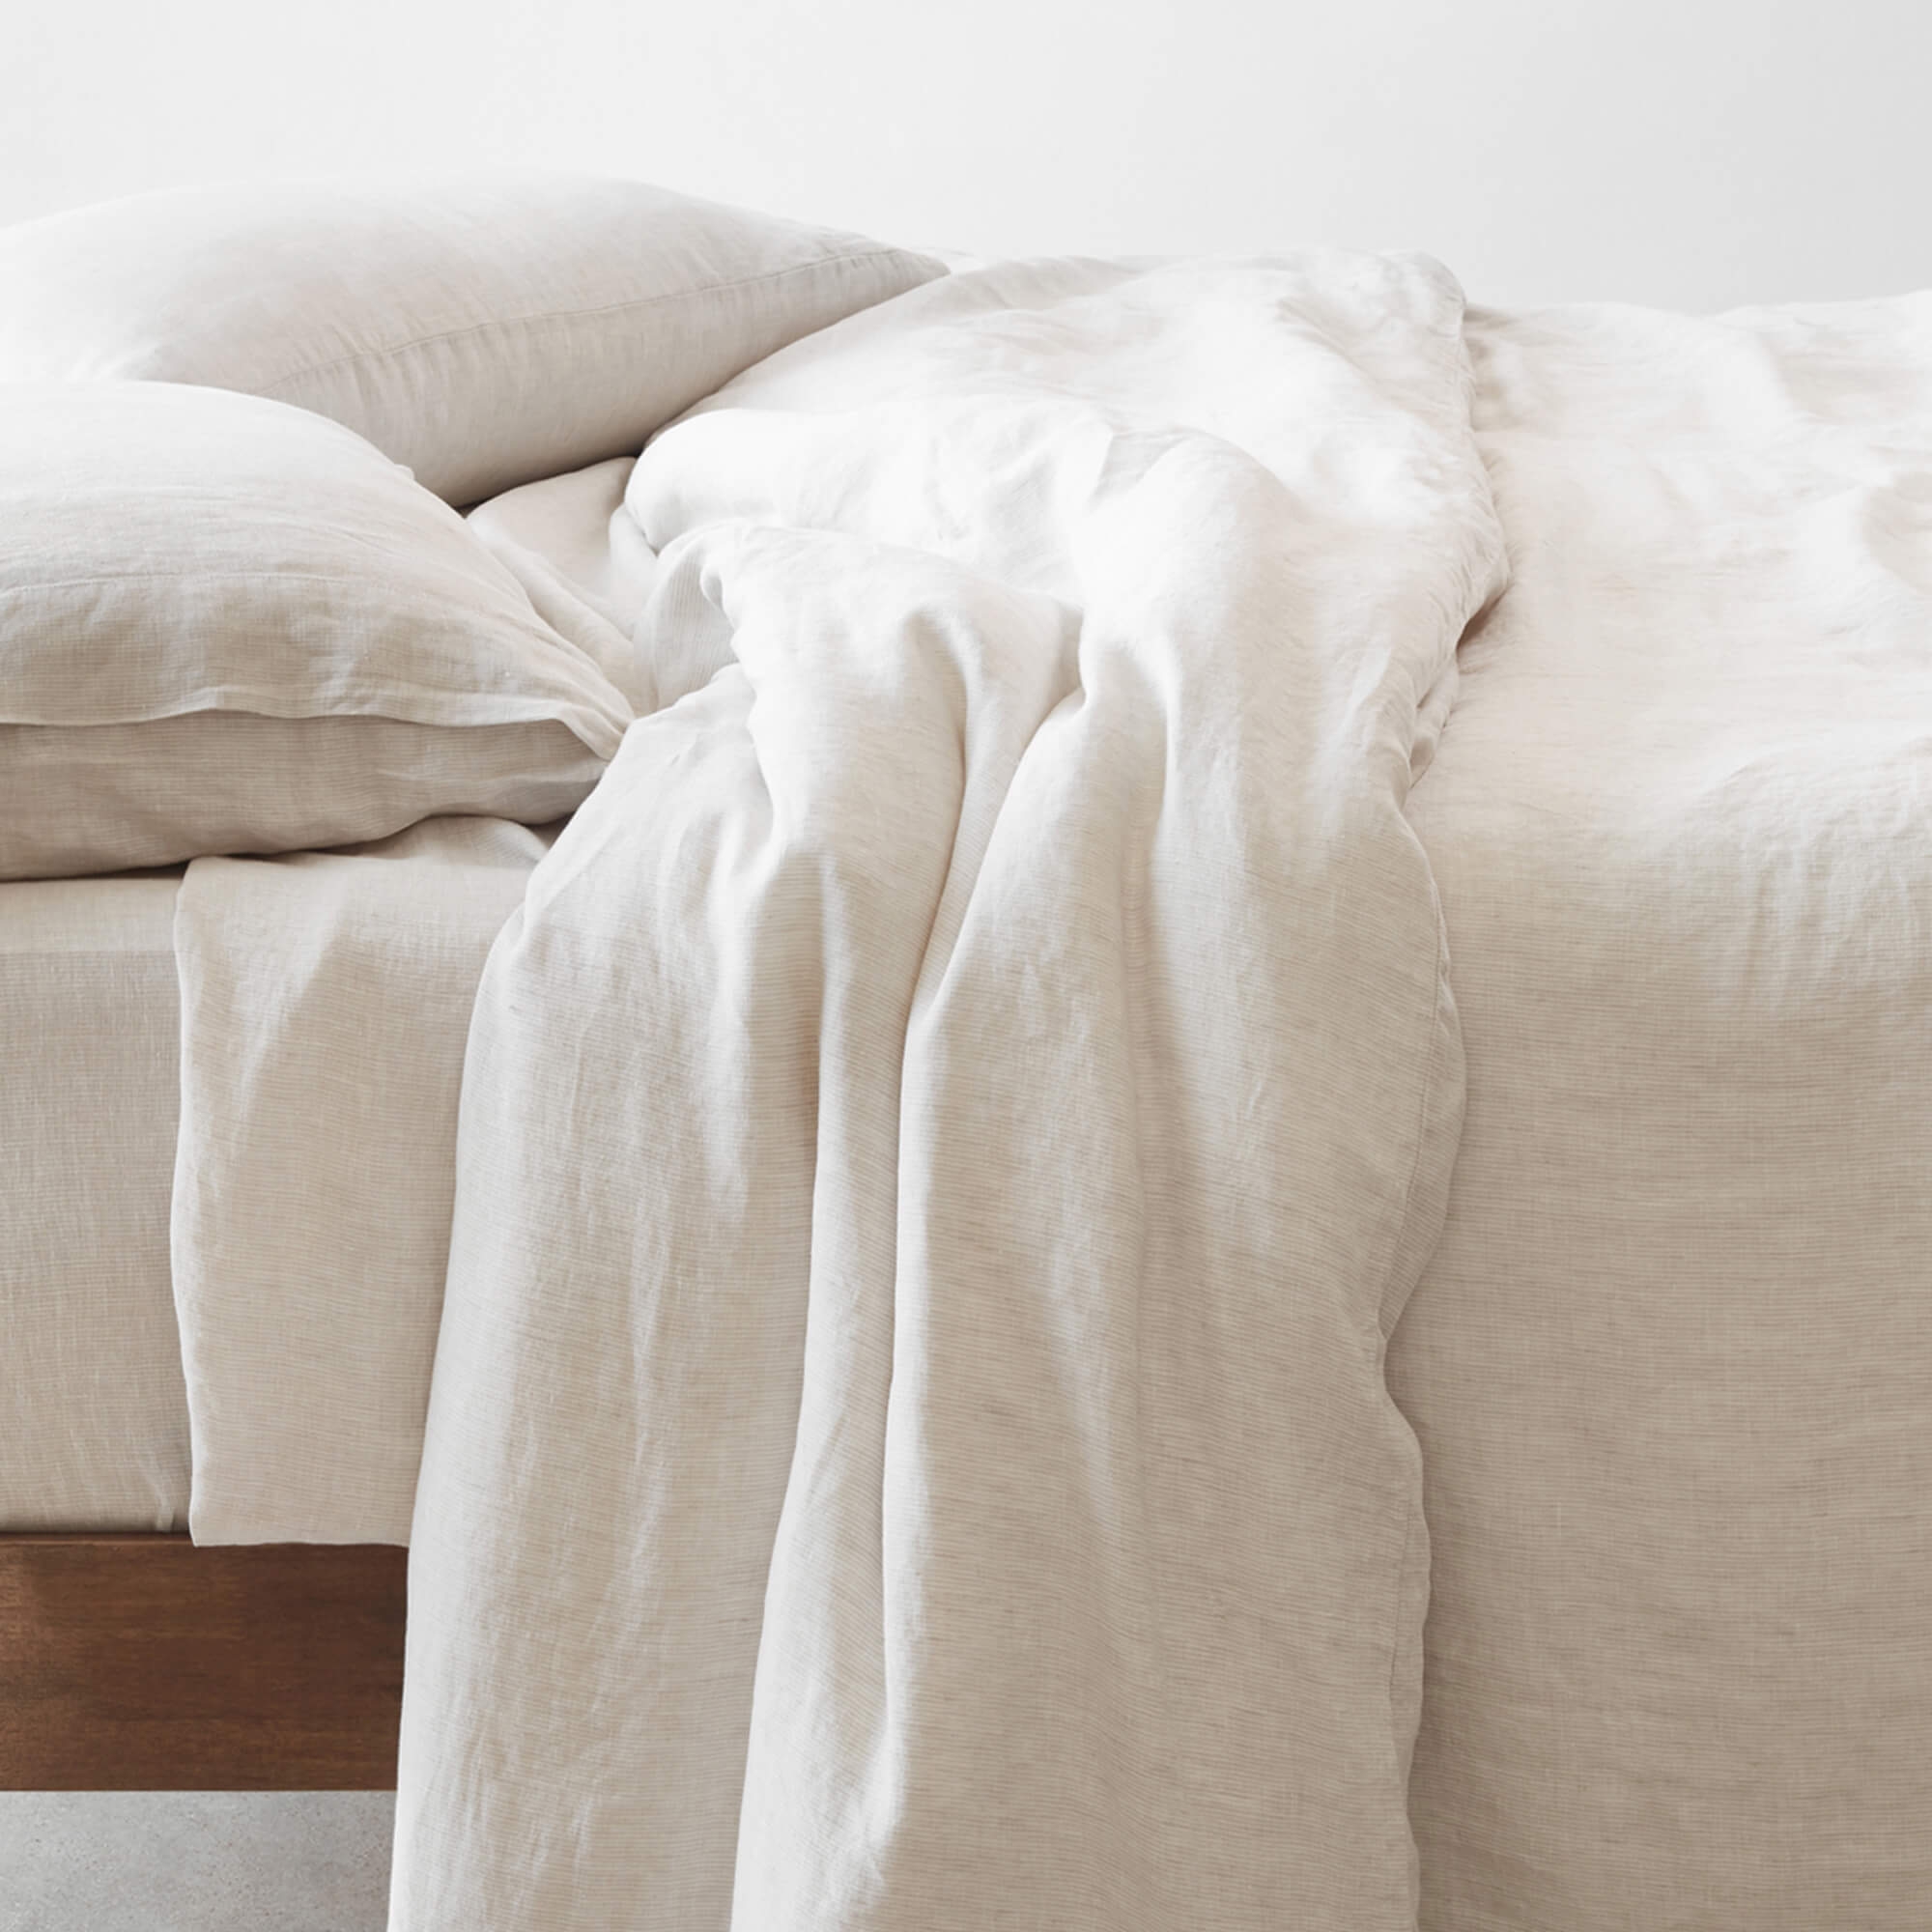 The Citizenry Stonewashed Linen Duvet Cover | King/Cal King | Duvet Only | Solid Sand - Image 7